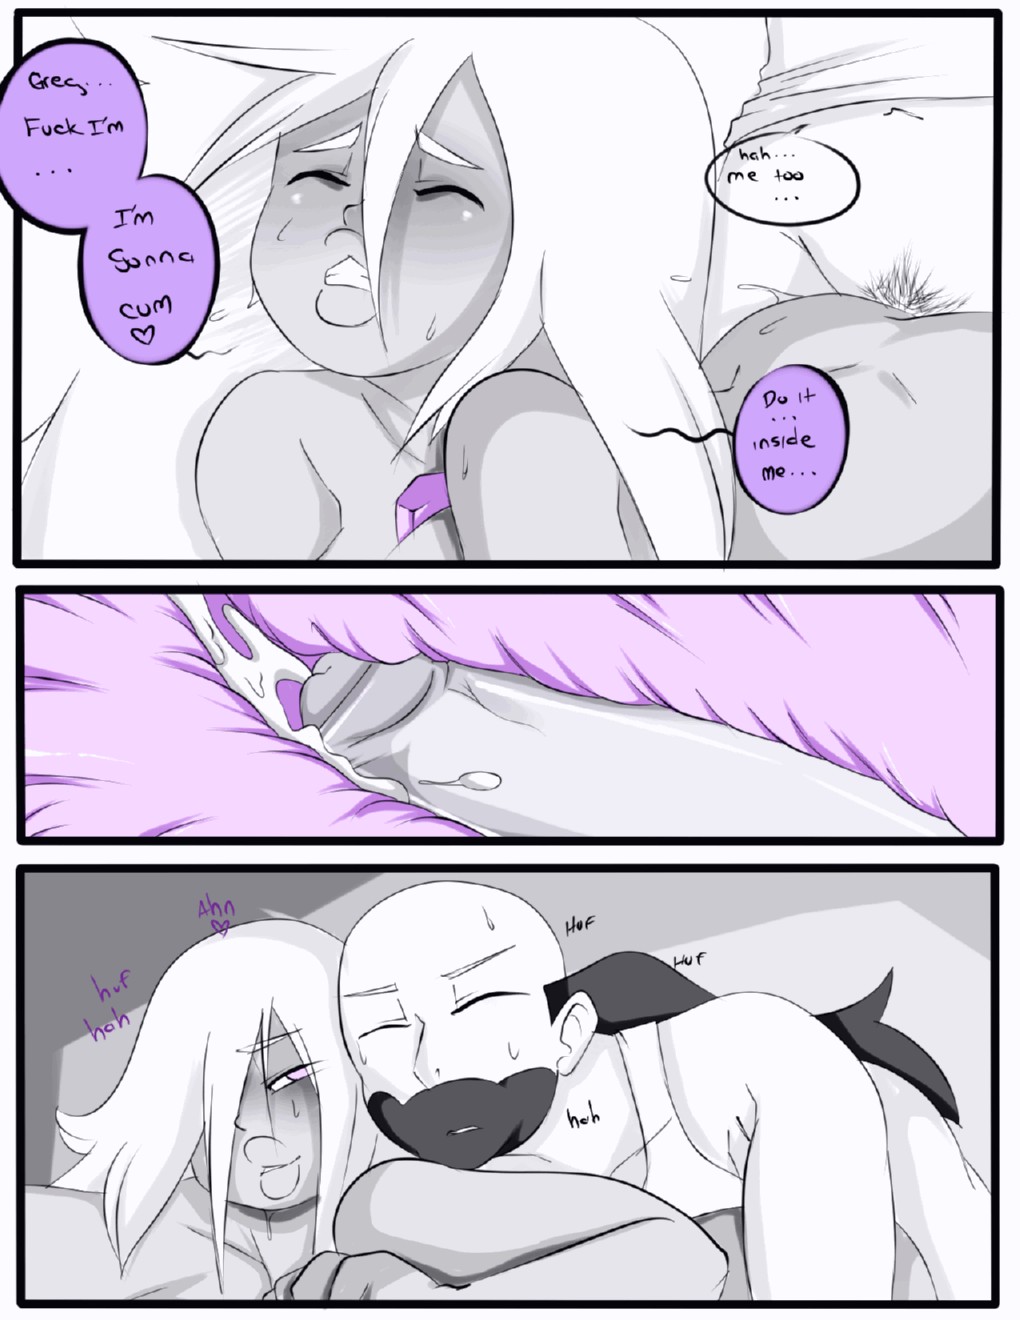 Amethyst's drinking problem porn comic page 009